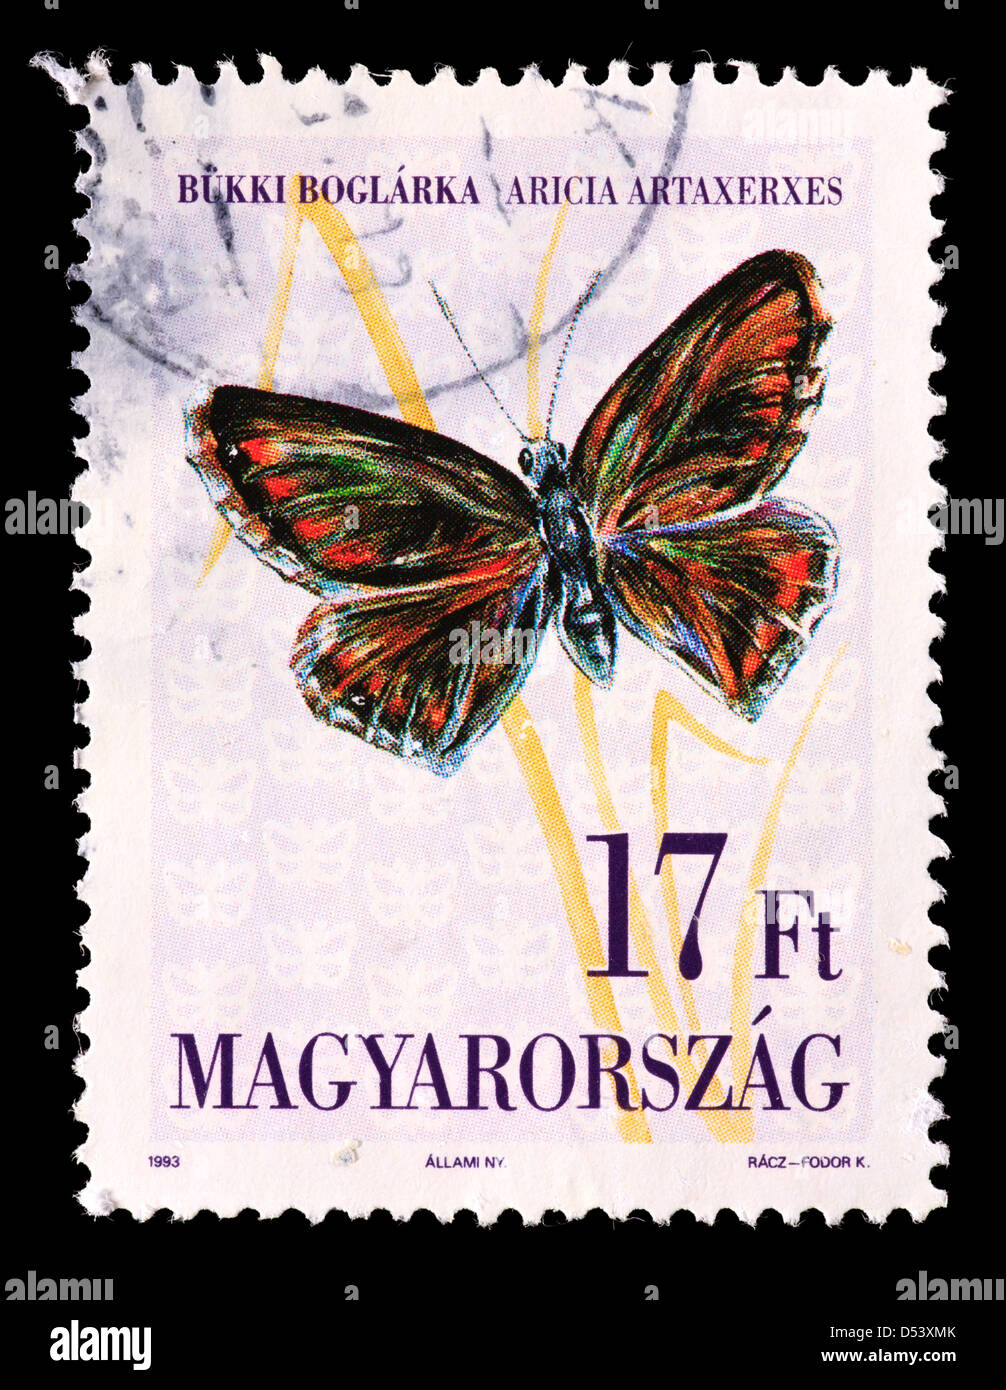 Postage stamp from Hungary depicting Northern Brown Argus butterfly (Aricia artaxerxes) Stock Photo